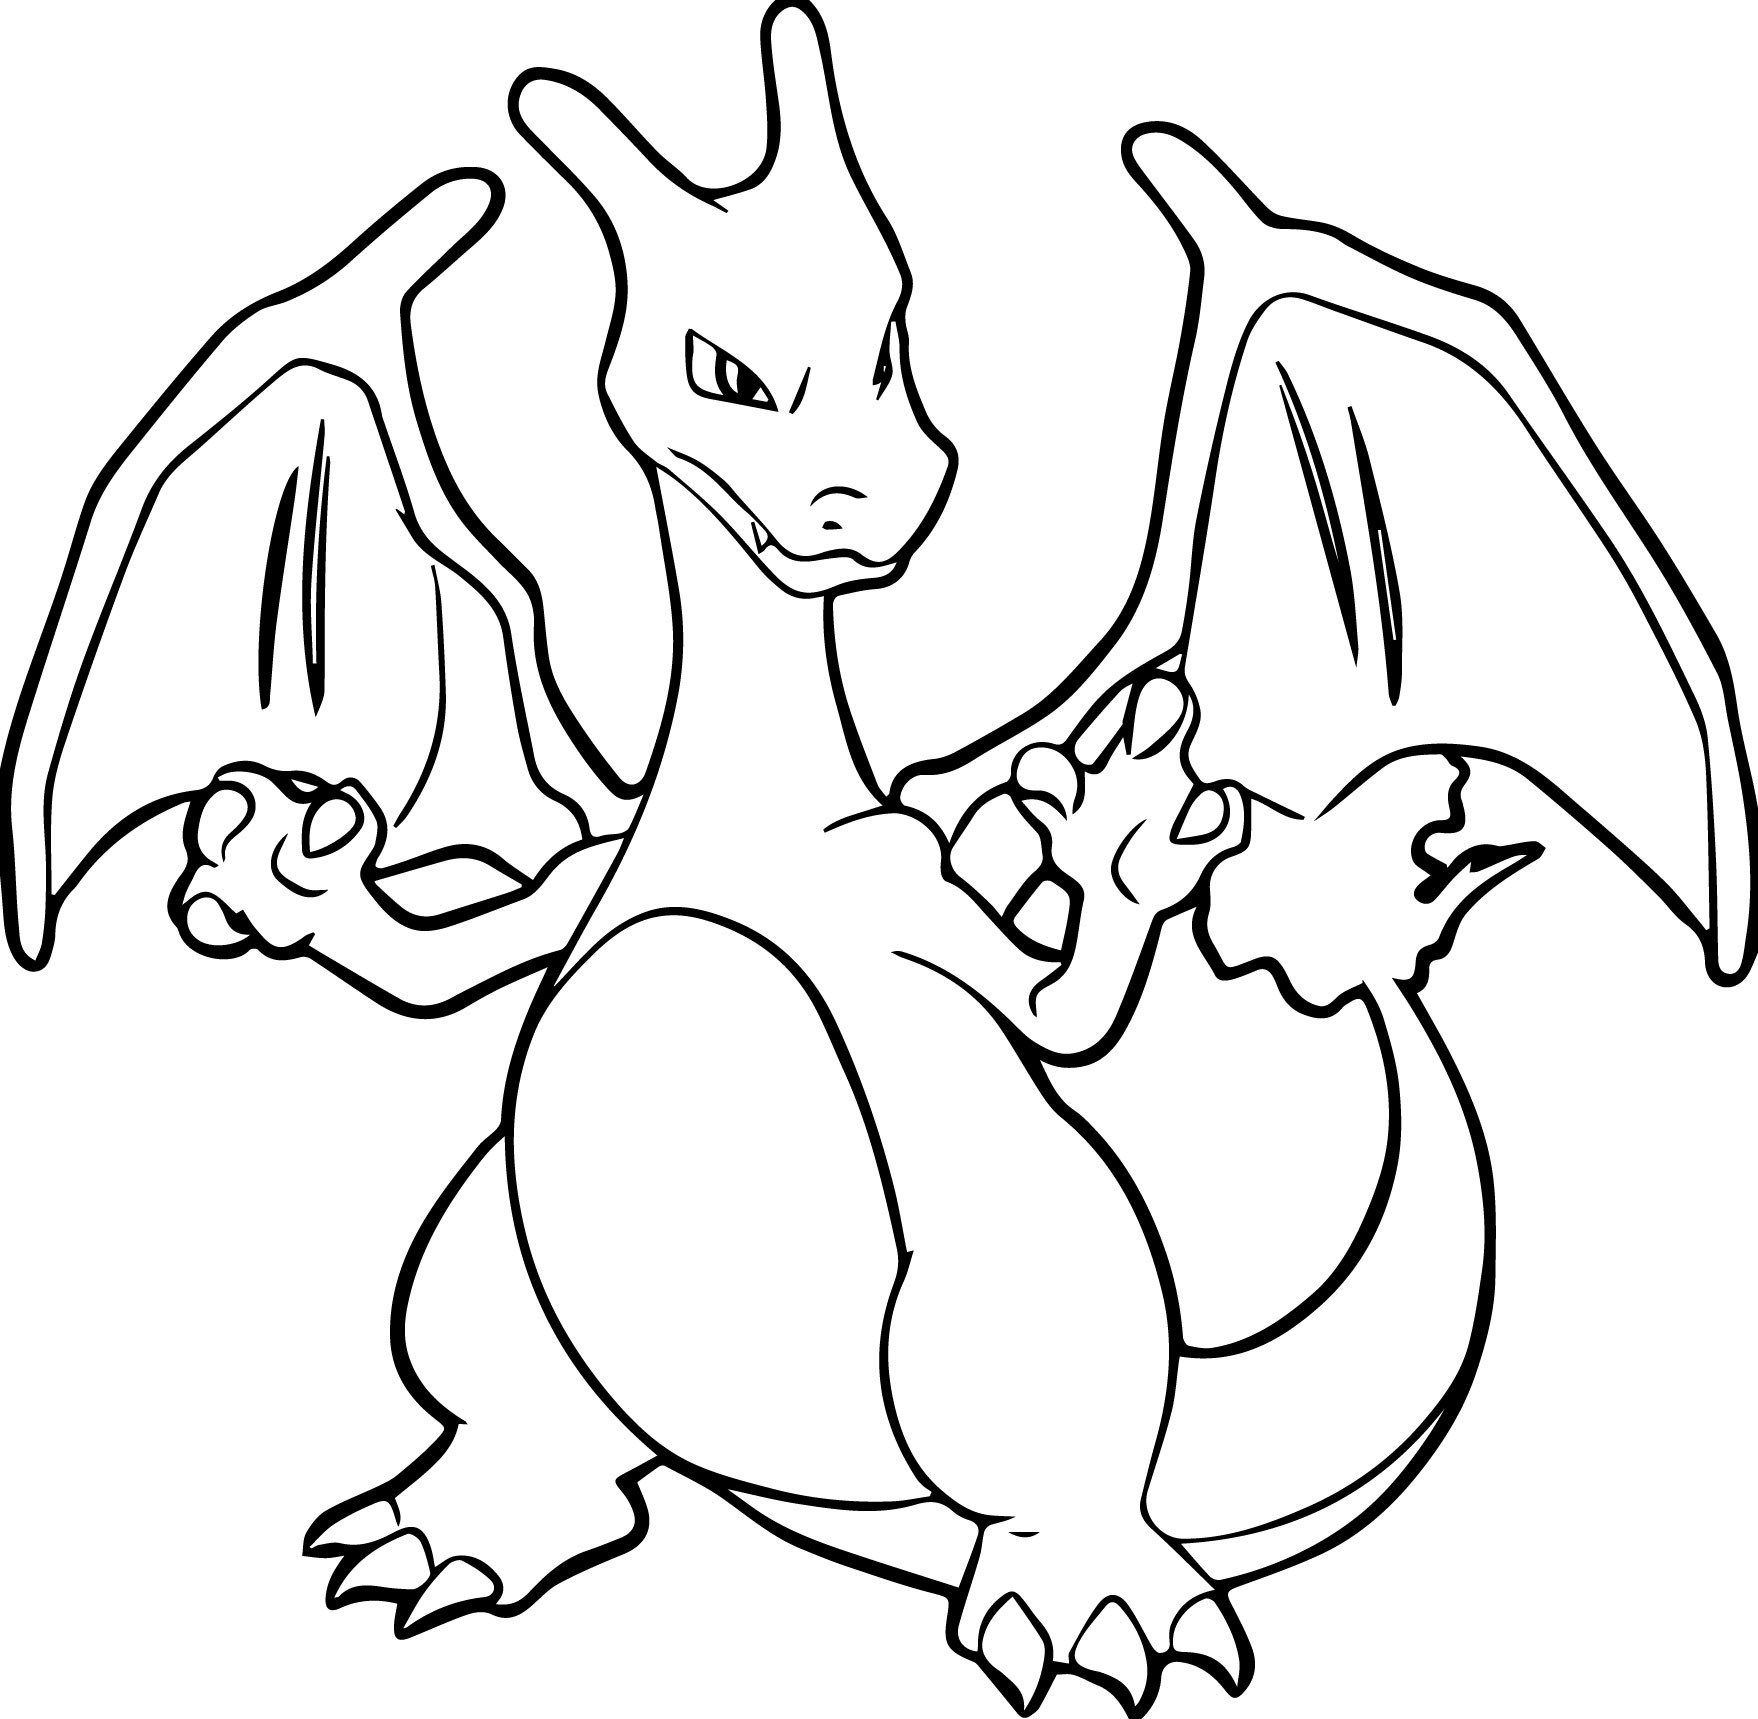 Cute Pokemon Coloring Pages Charmander.